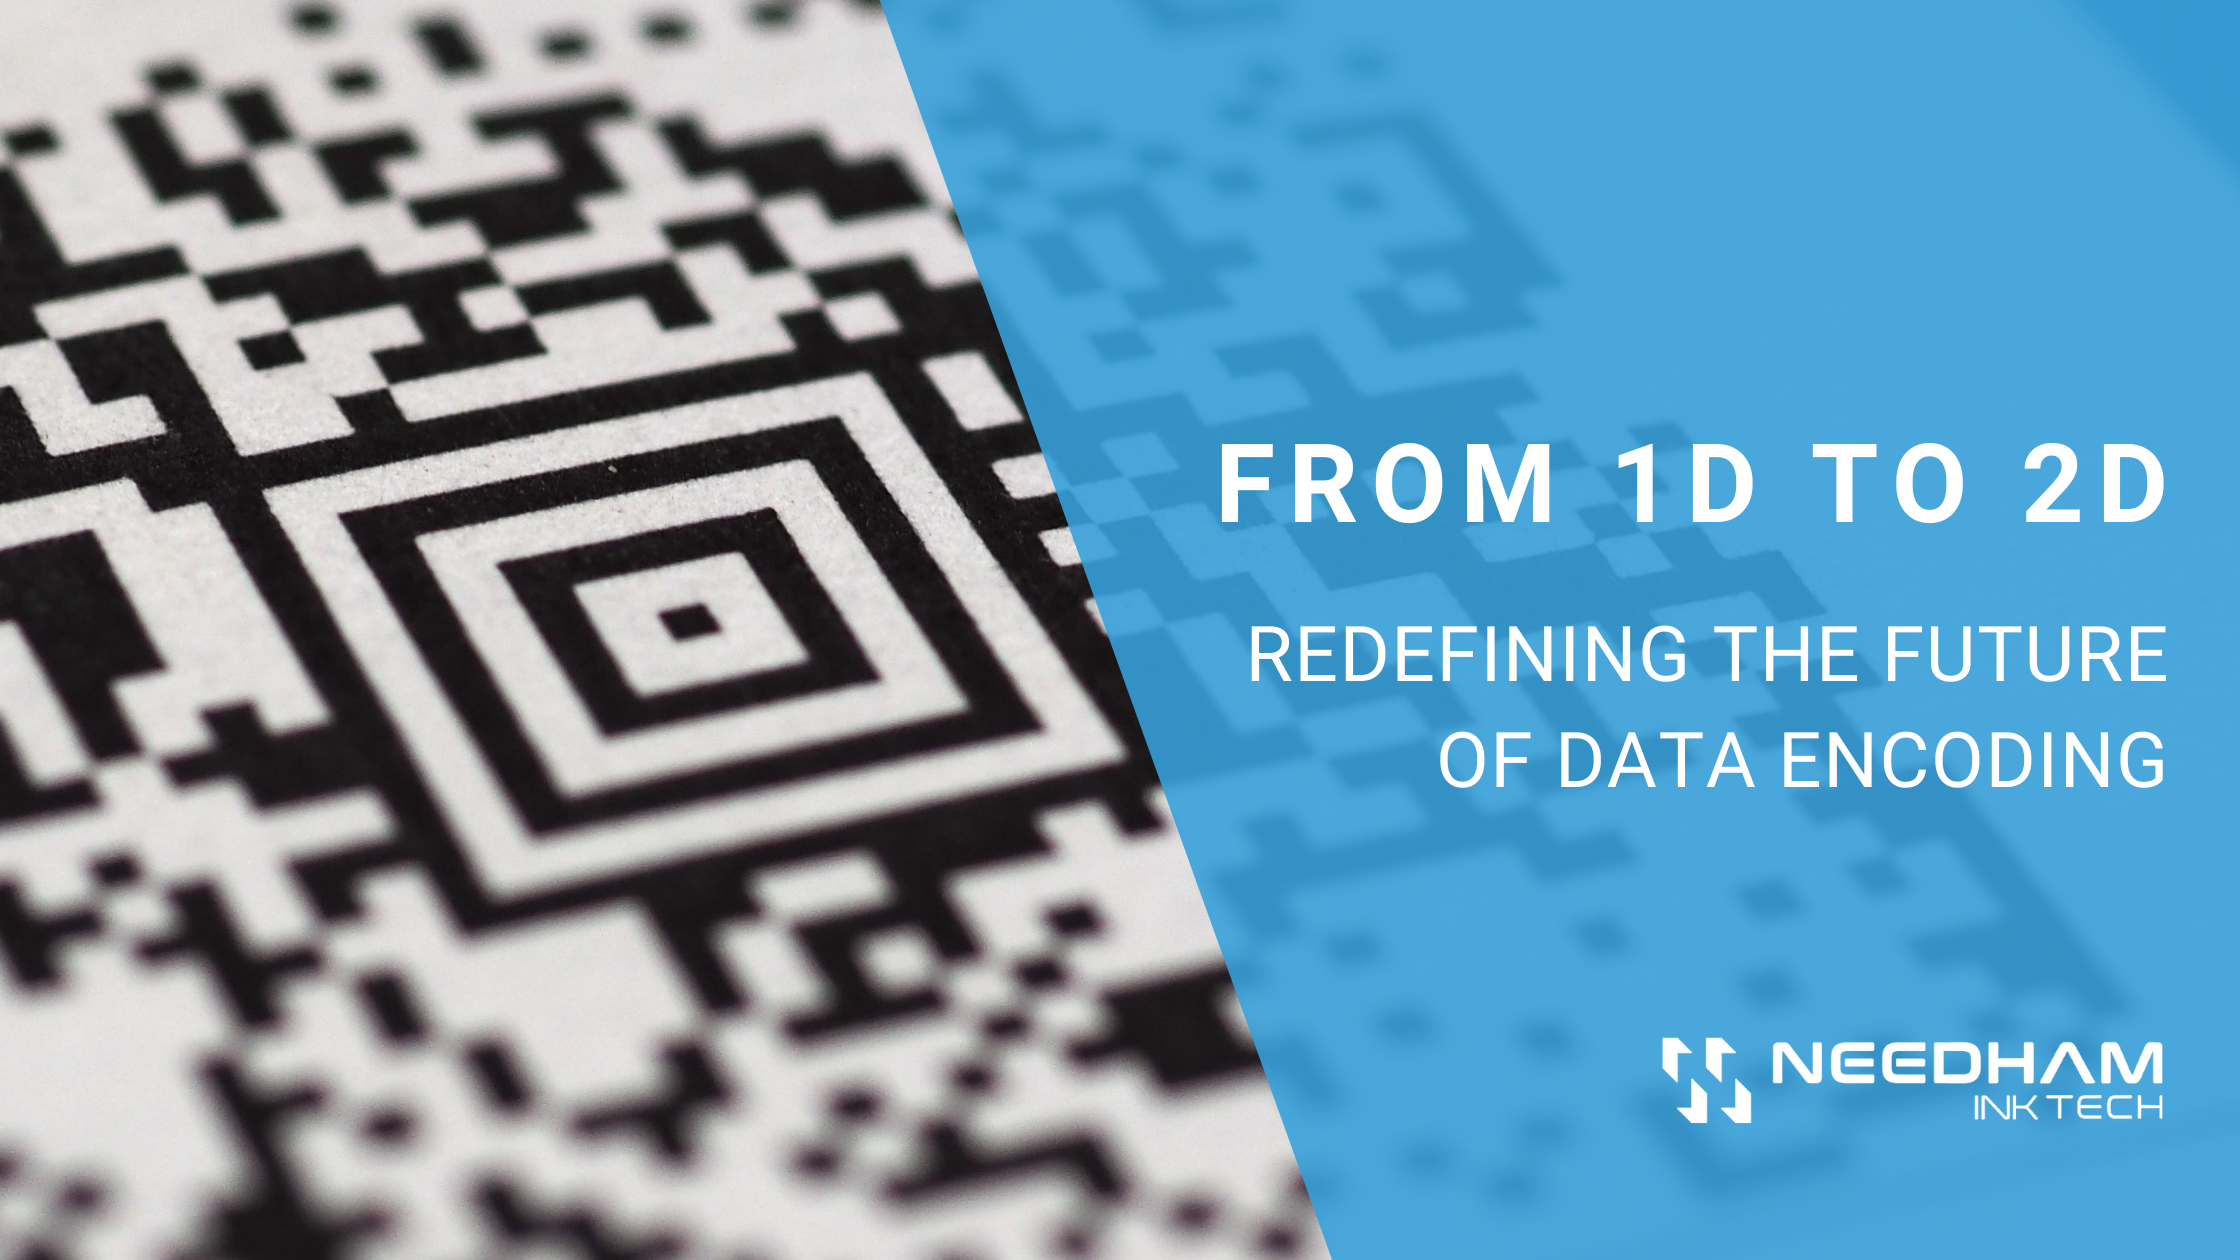 From 1D to 2D: Redefining the future of data encoding